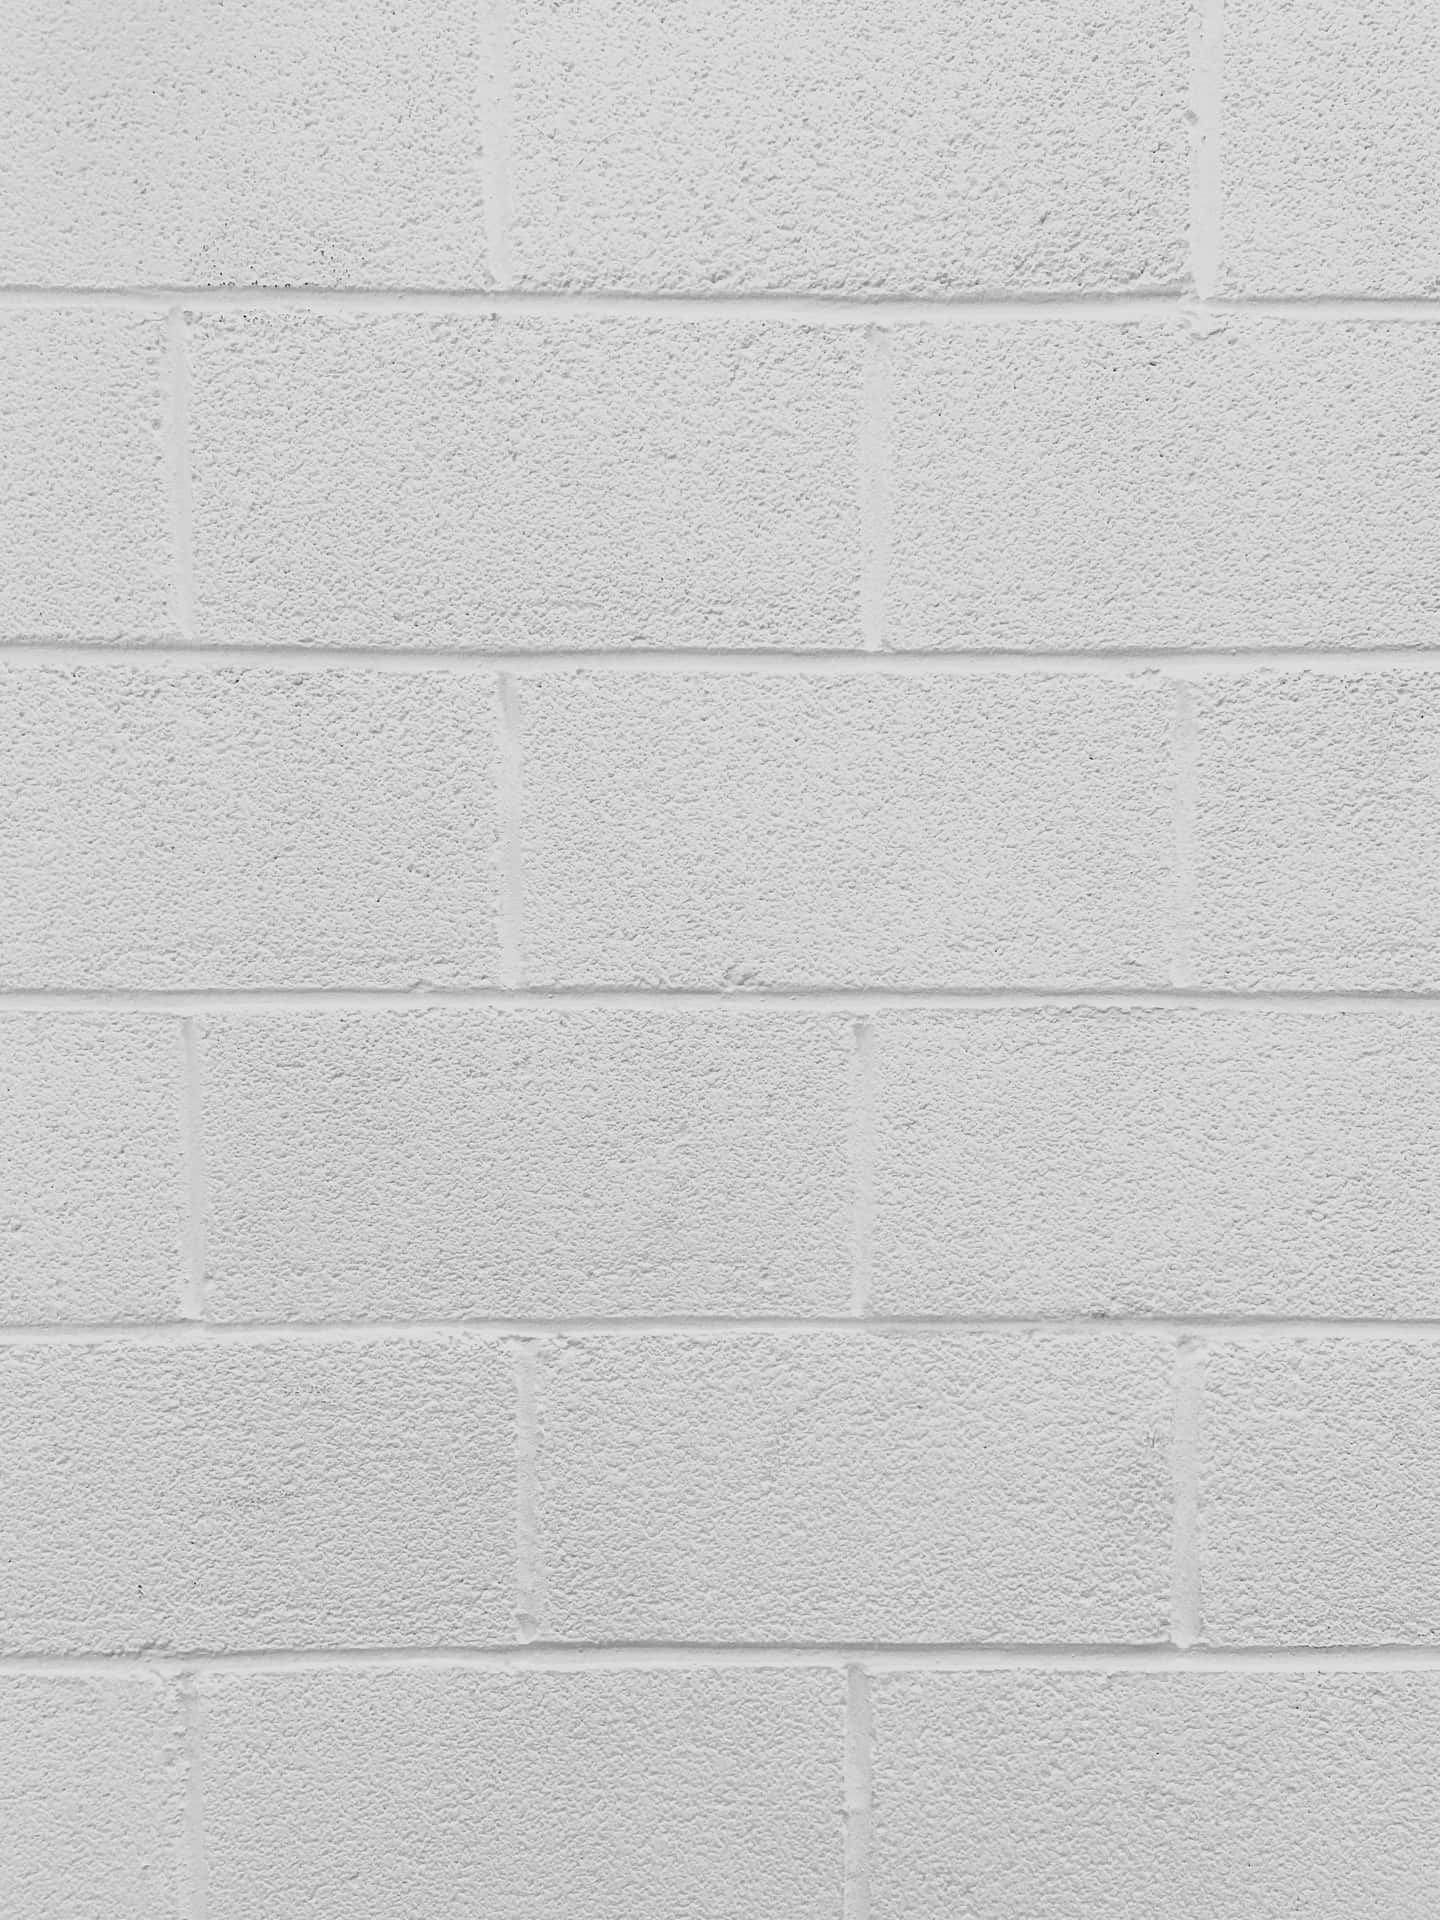 A White Brick Wall With A White Brick Texture